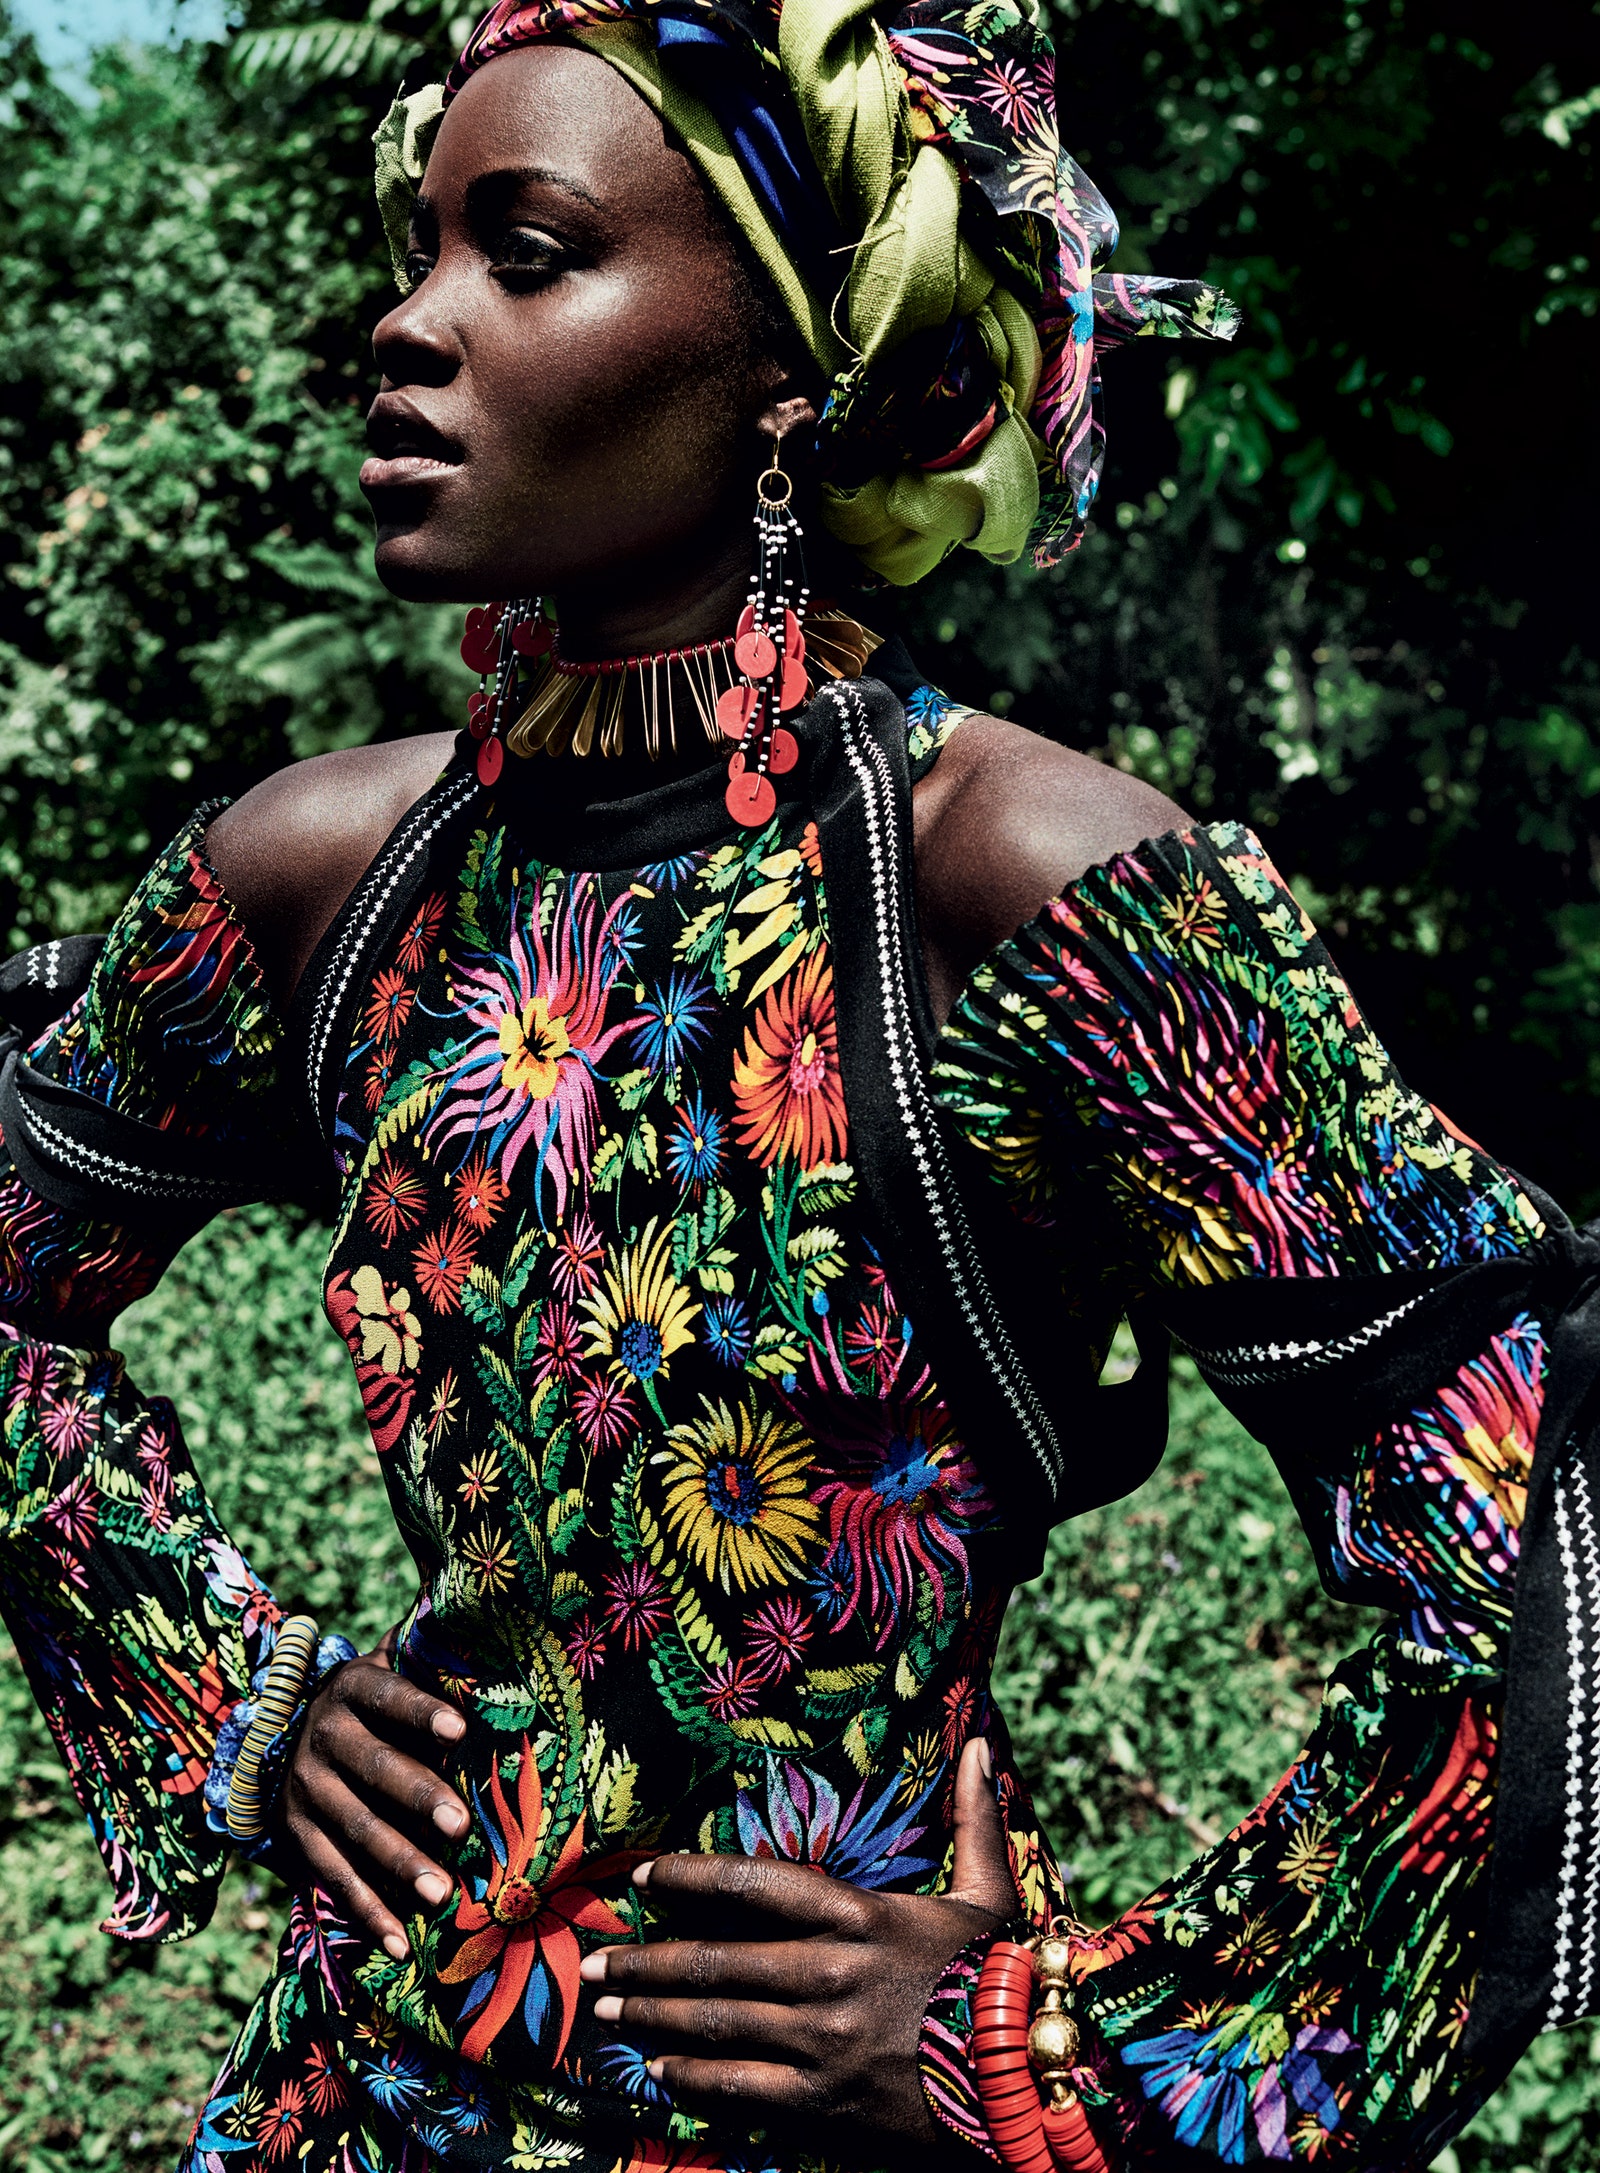 Lupita Nyong'o featured in October 2016 Vogue magazine